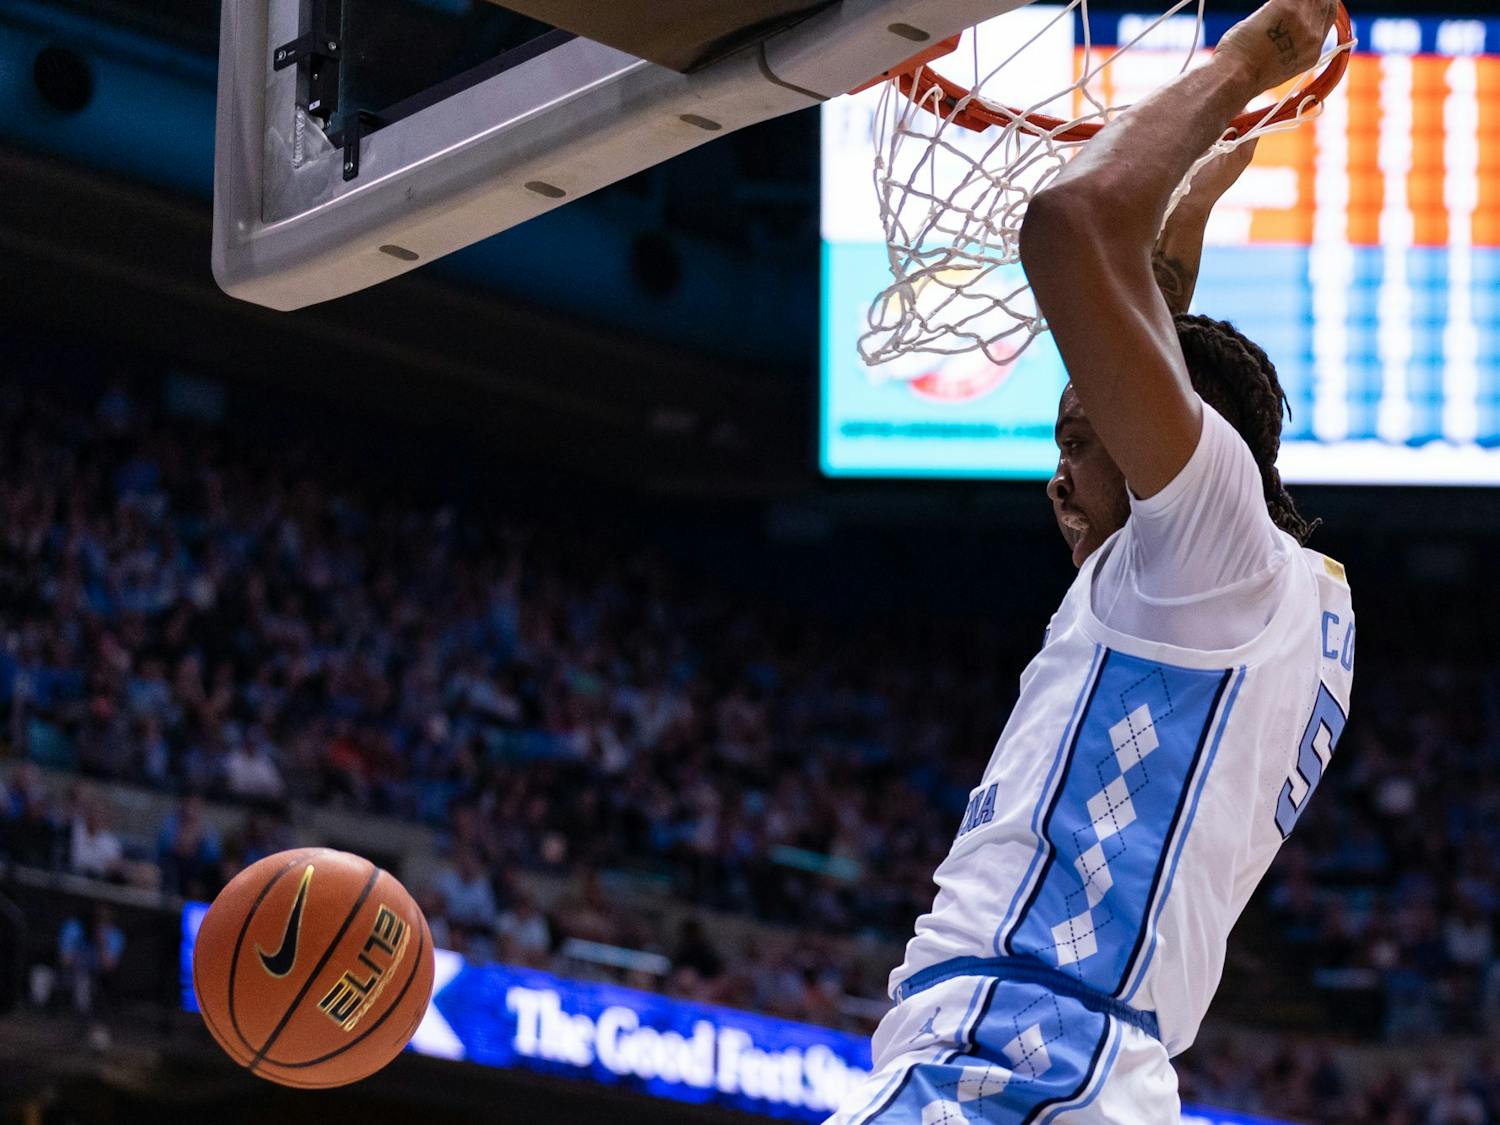 UNC senior center Armando Bacot (5) dunks the ball during the men’s basketball game against Clemson on Saturday, Feb. 11, 2023, at the Dean E. Smith Center. UNC beat Clemson 91-71.